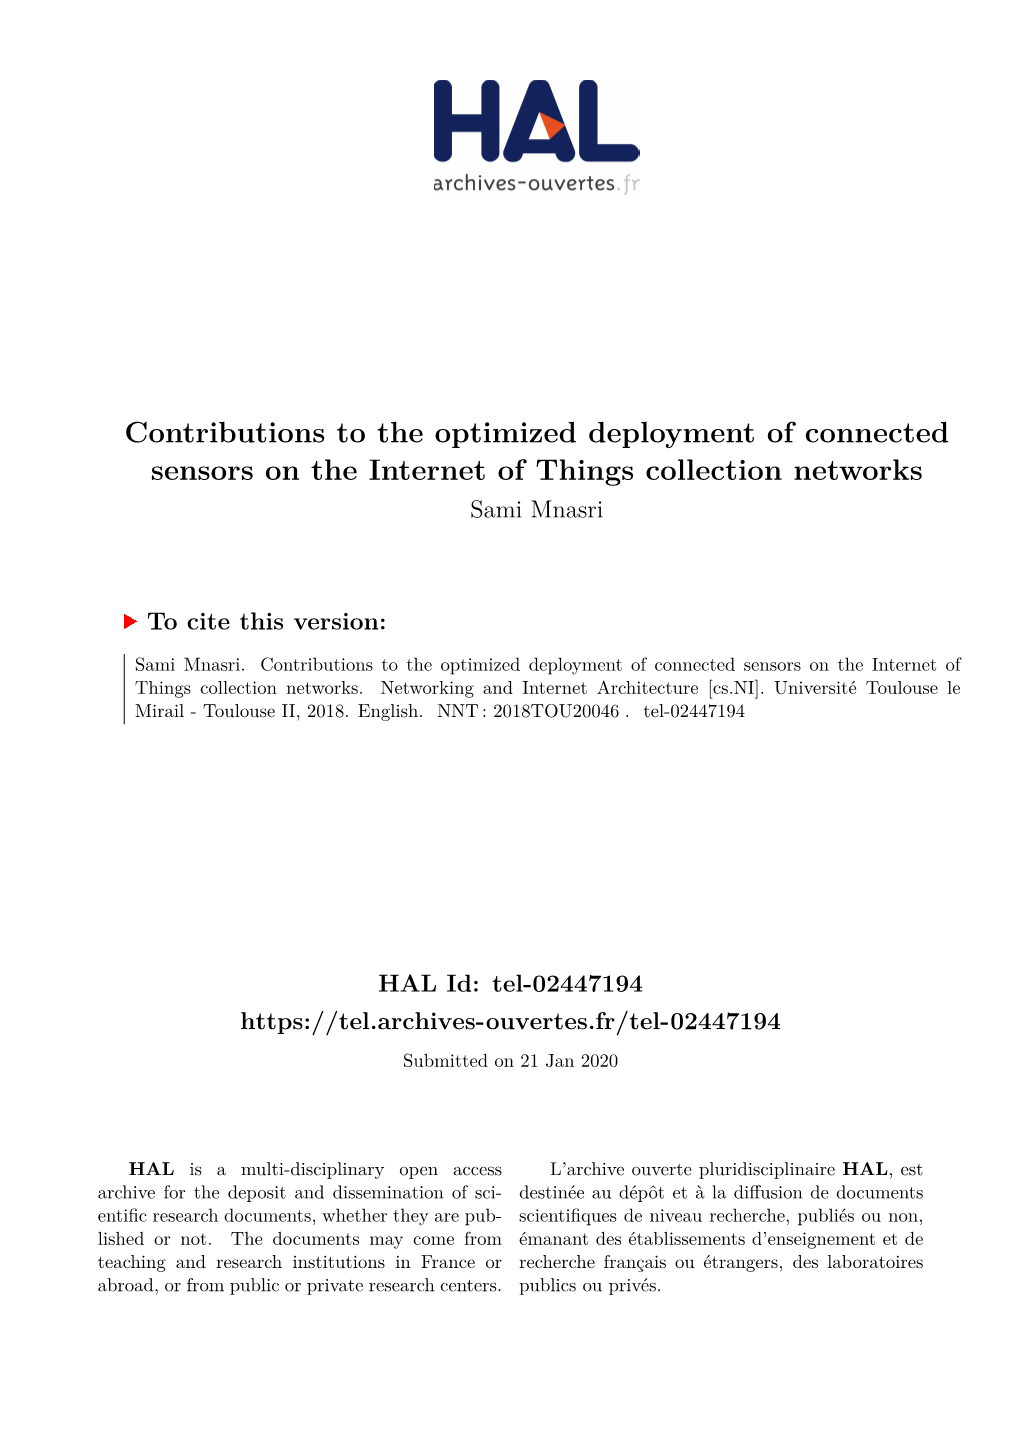 Contributions to the Optimized Deployment of Connected Sensors on the Internet of Things Collection Networks Sami Mnasri